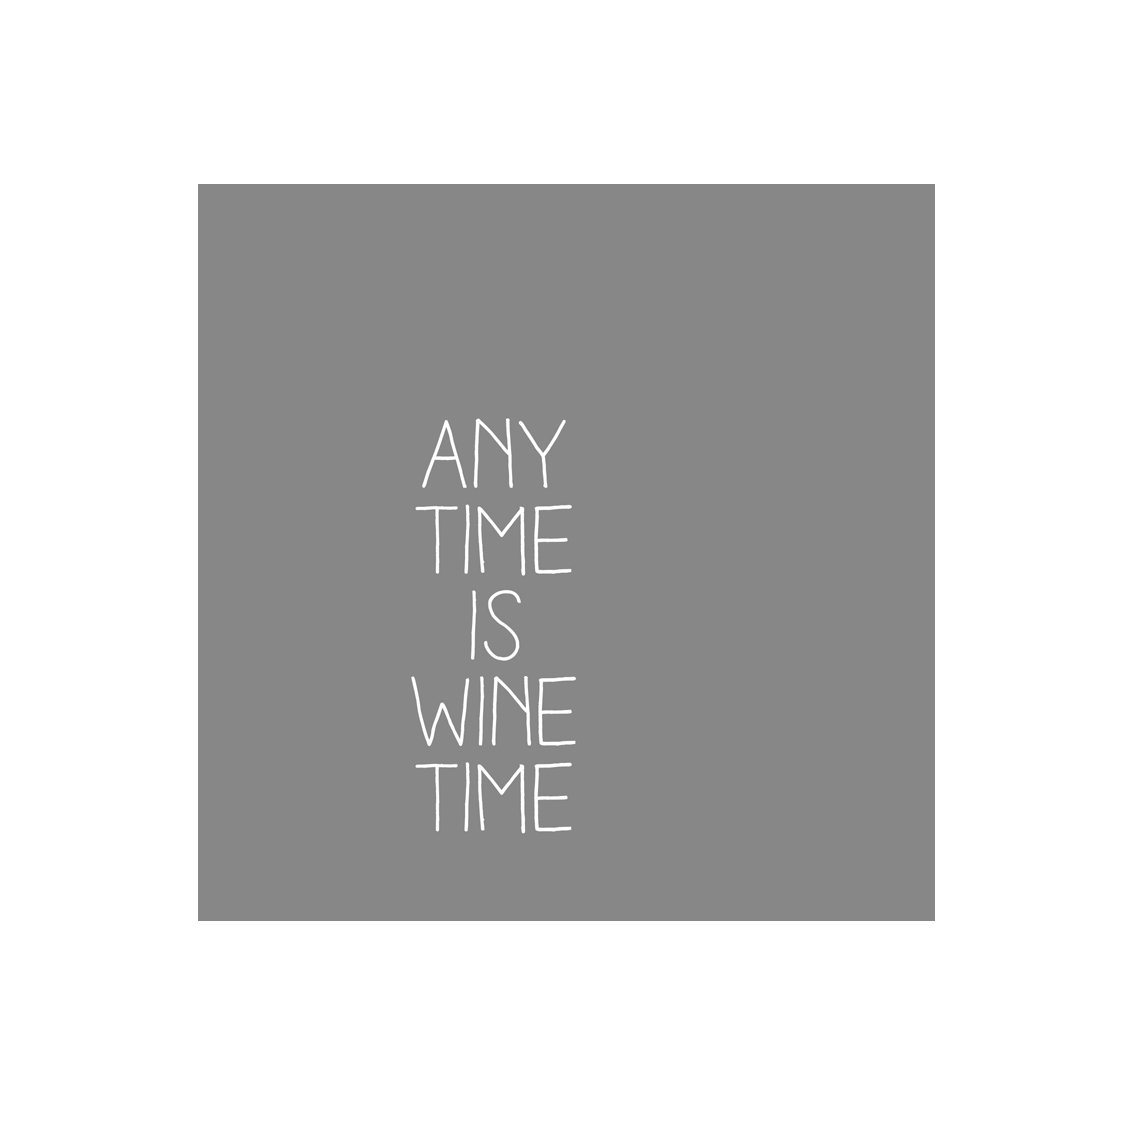 Weinservietten "Any time is wine time" 